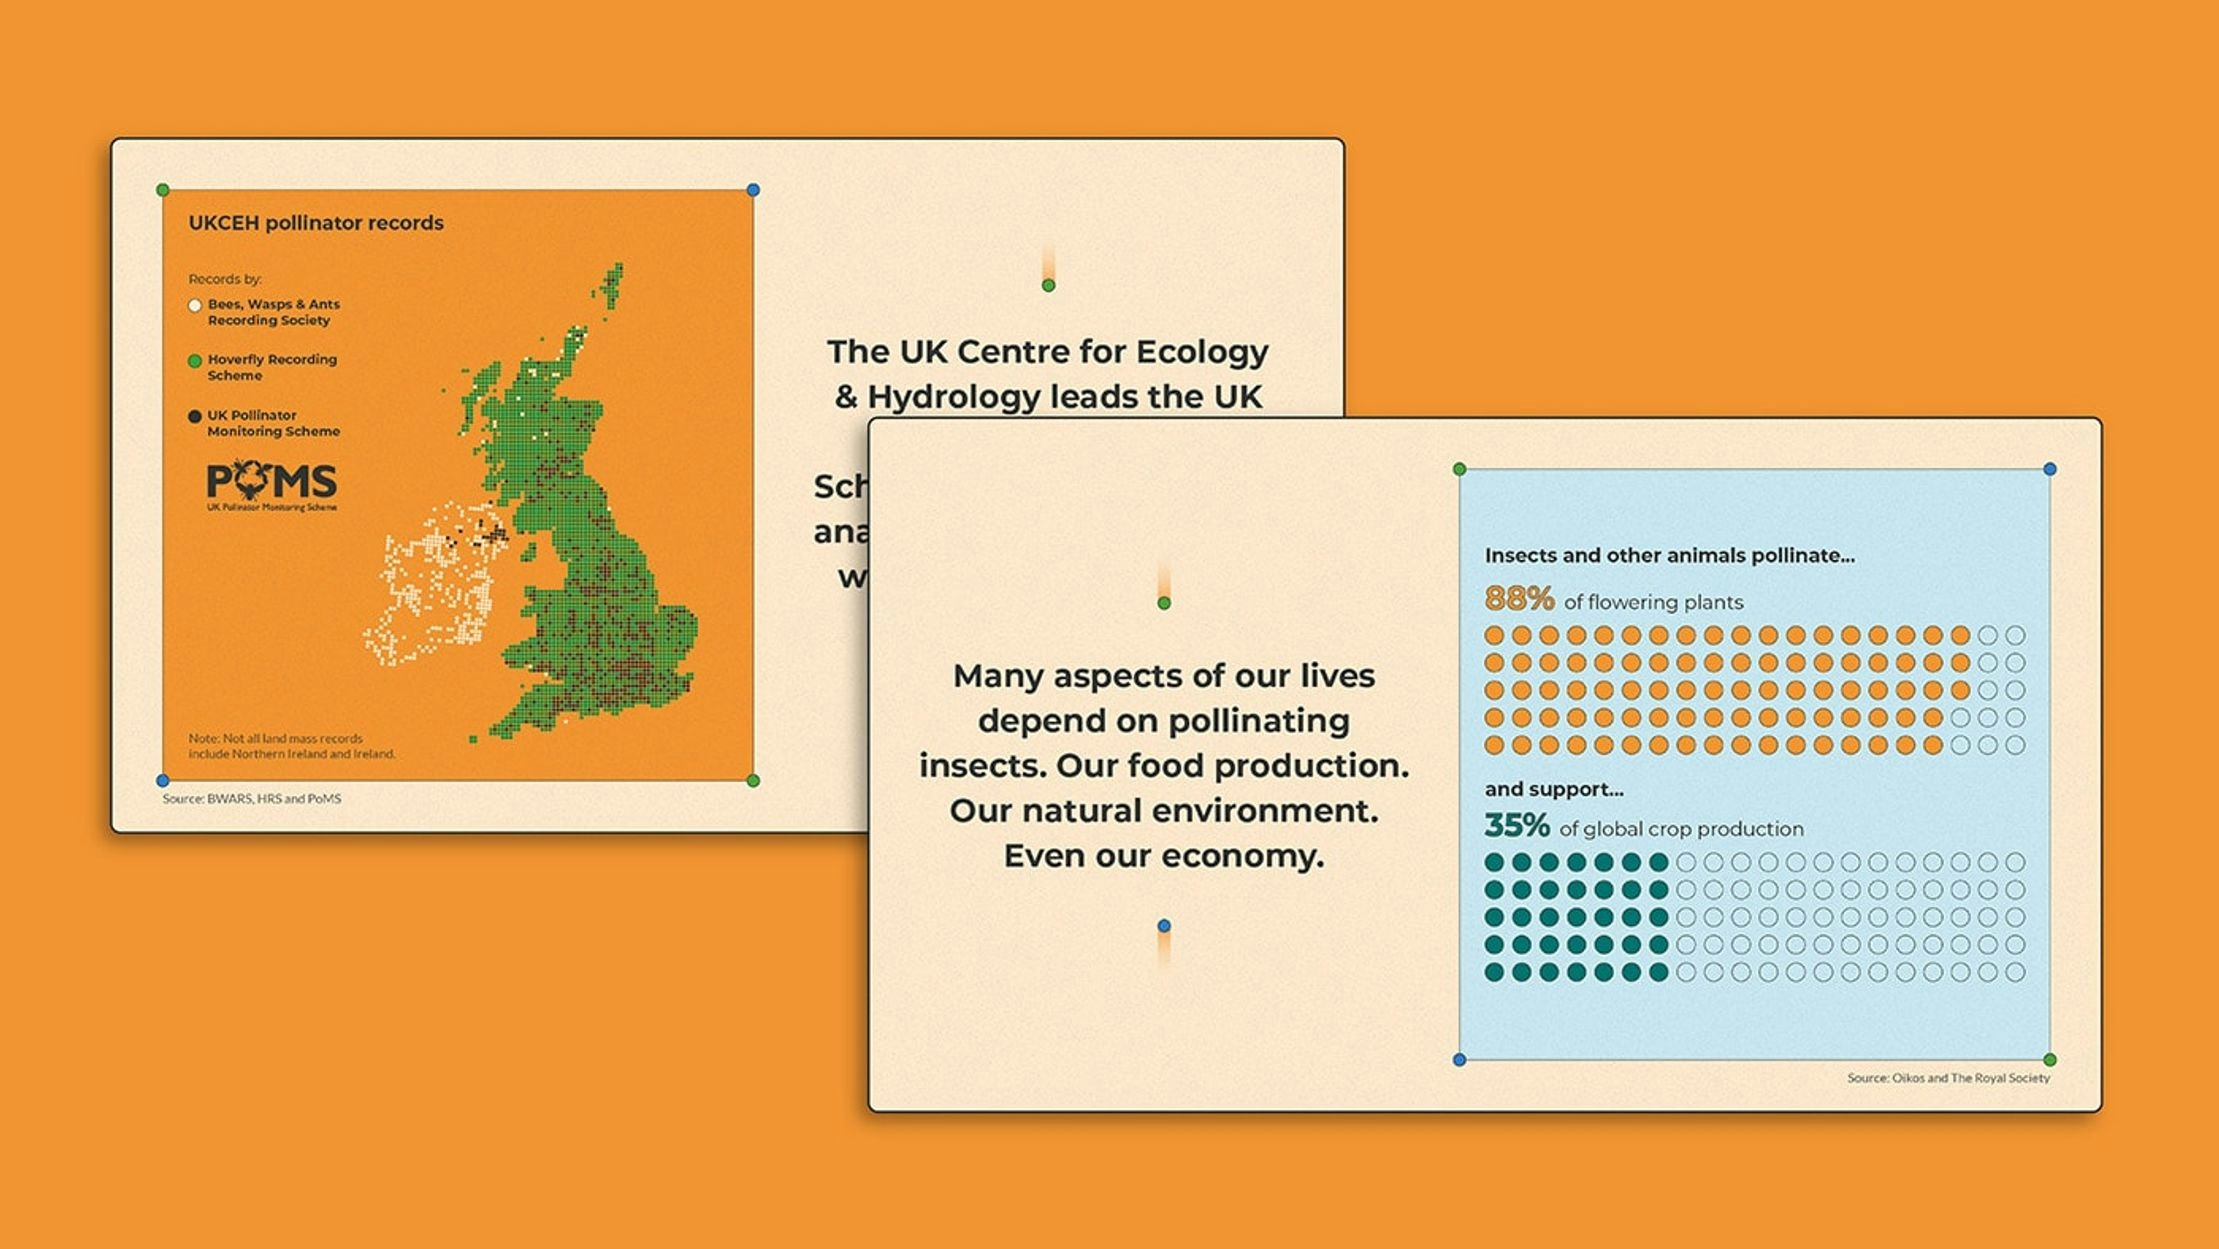 Two stills from the UKCEH data videos, slightly overlapping. Both include text alongside two data visualizations, one is a map the other is a waffle chart.